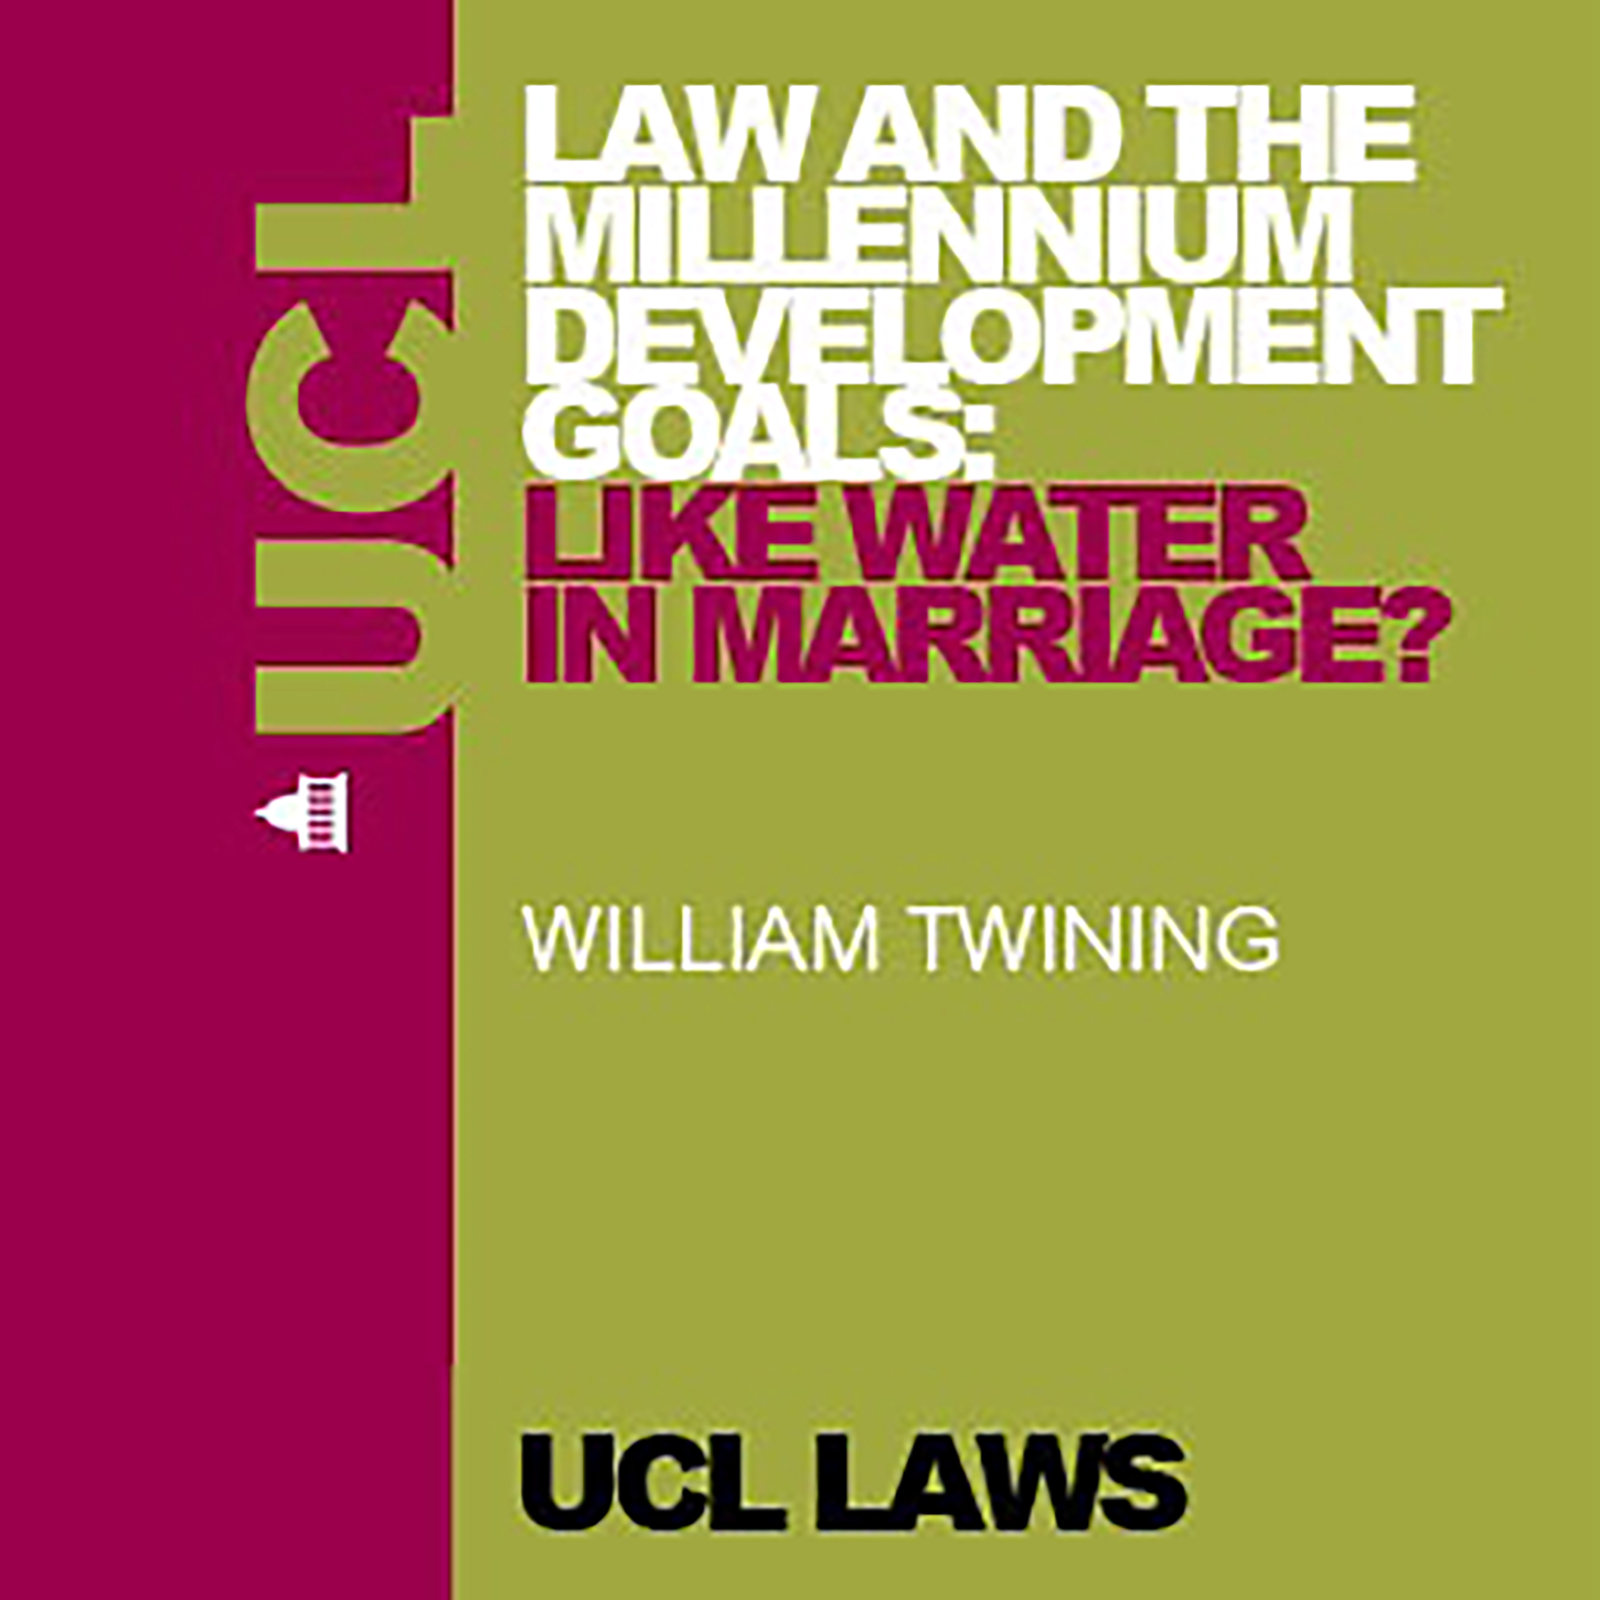 Law and the Millennium Development Goals: Like Water in Marriage? - Video